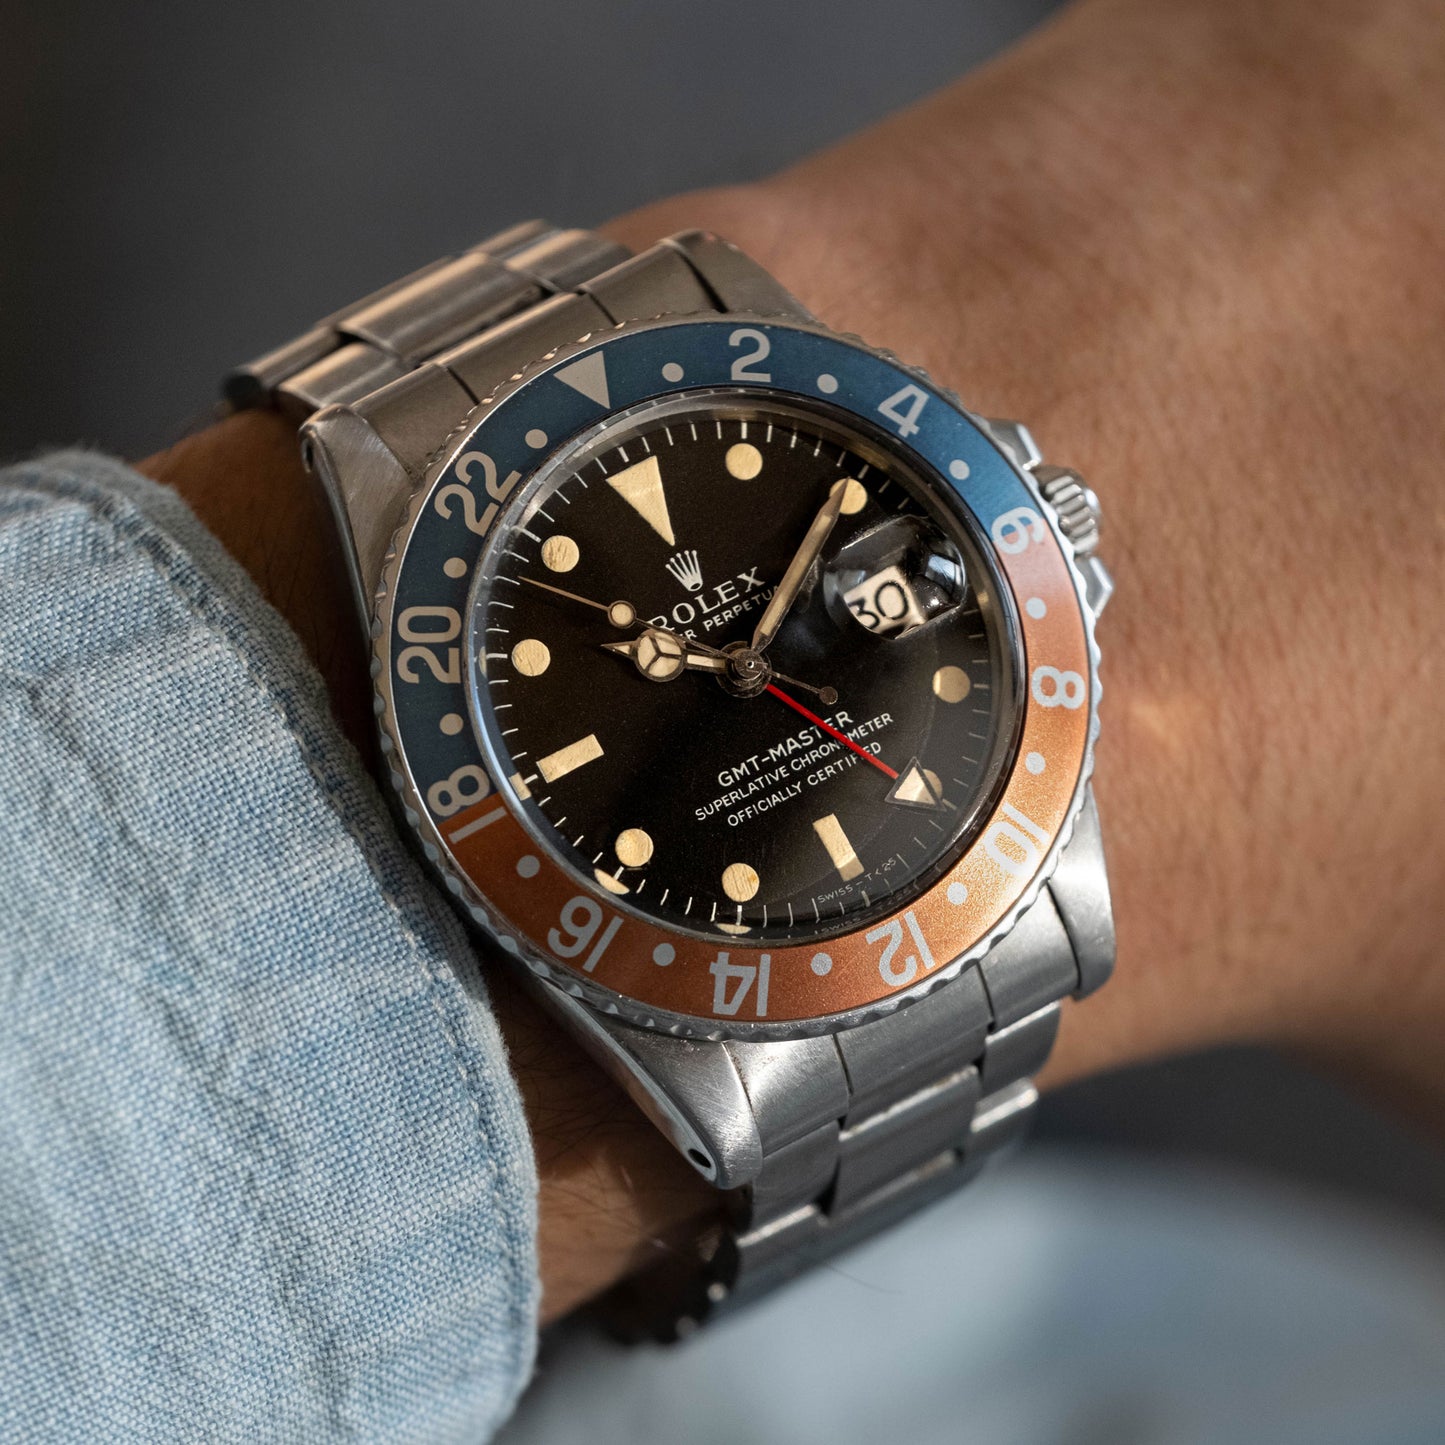 Rolex GMT Master ref.1675 "Long E" from 1970